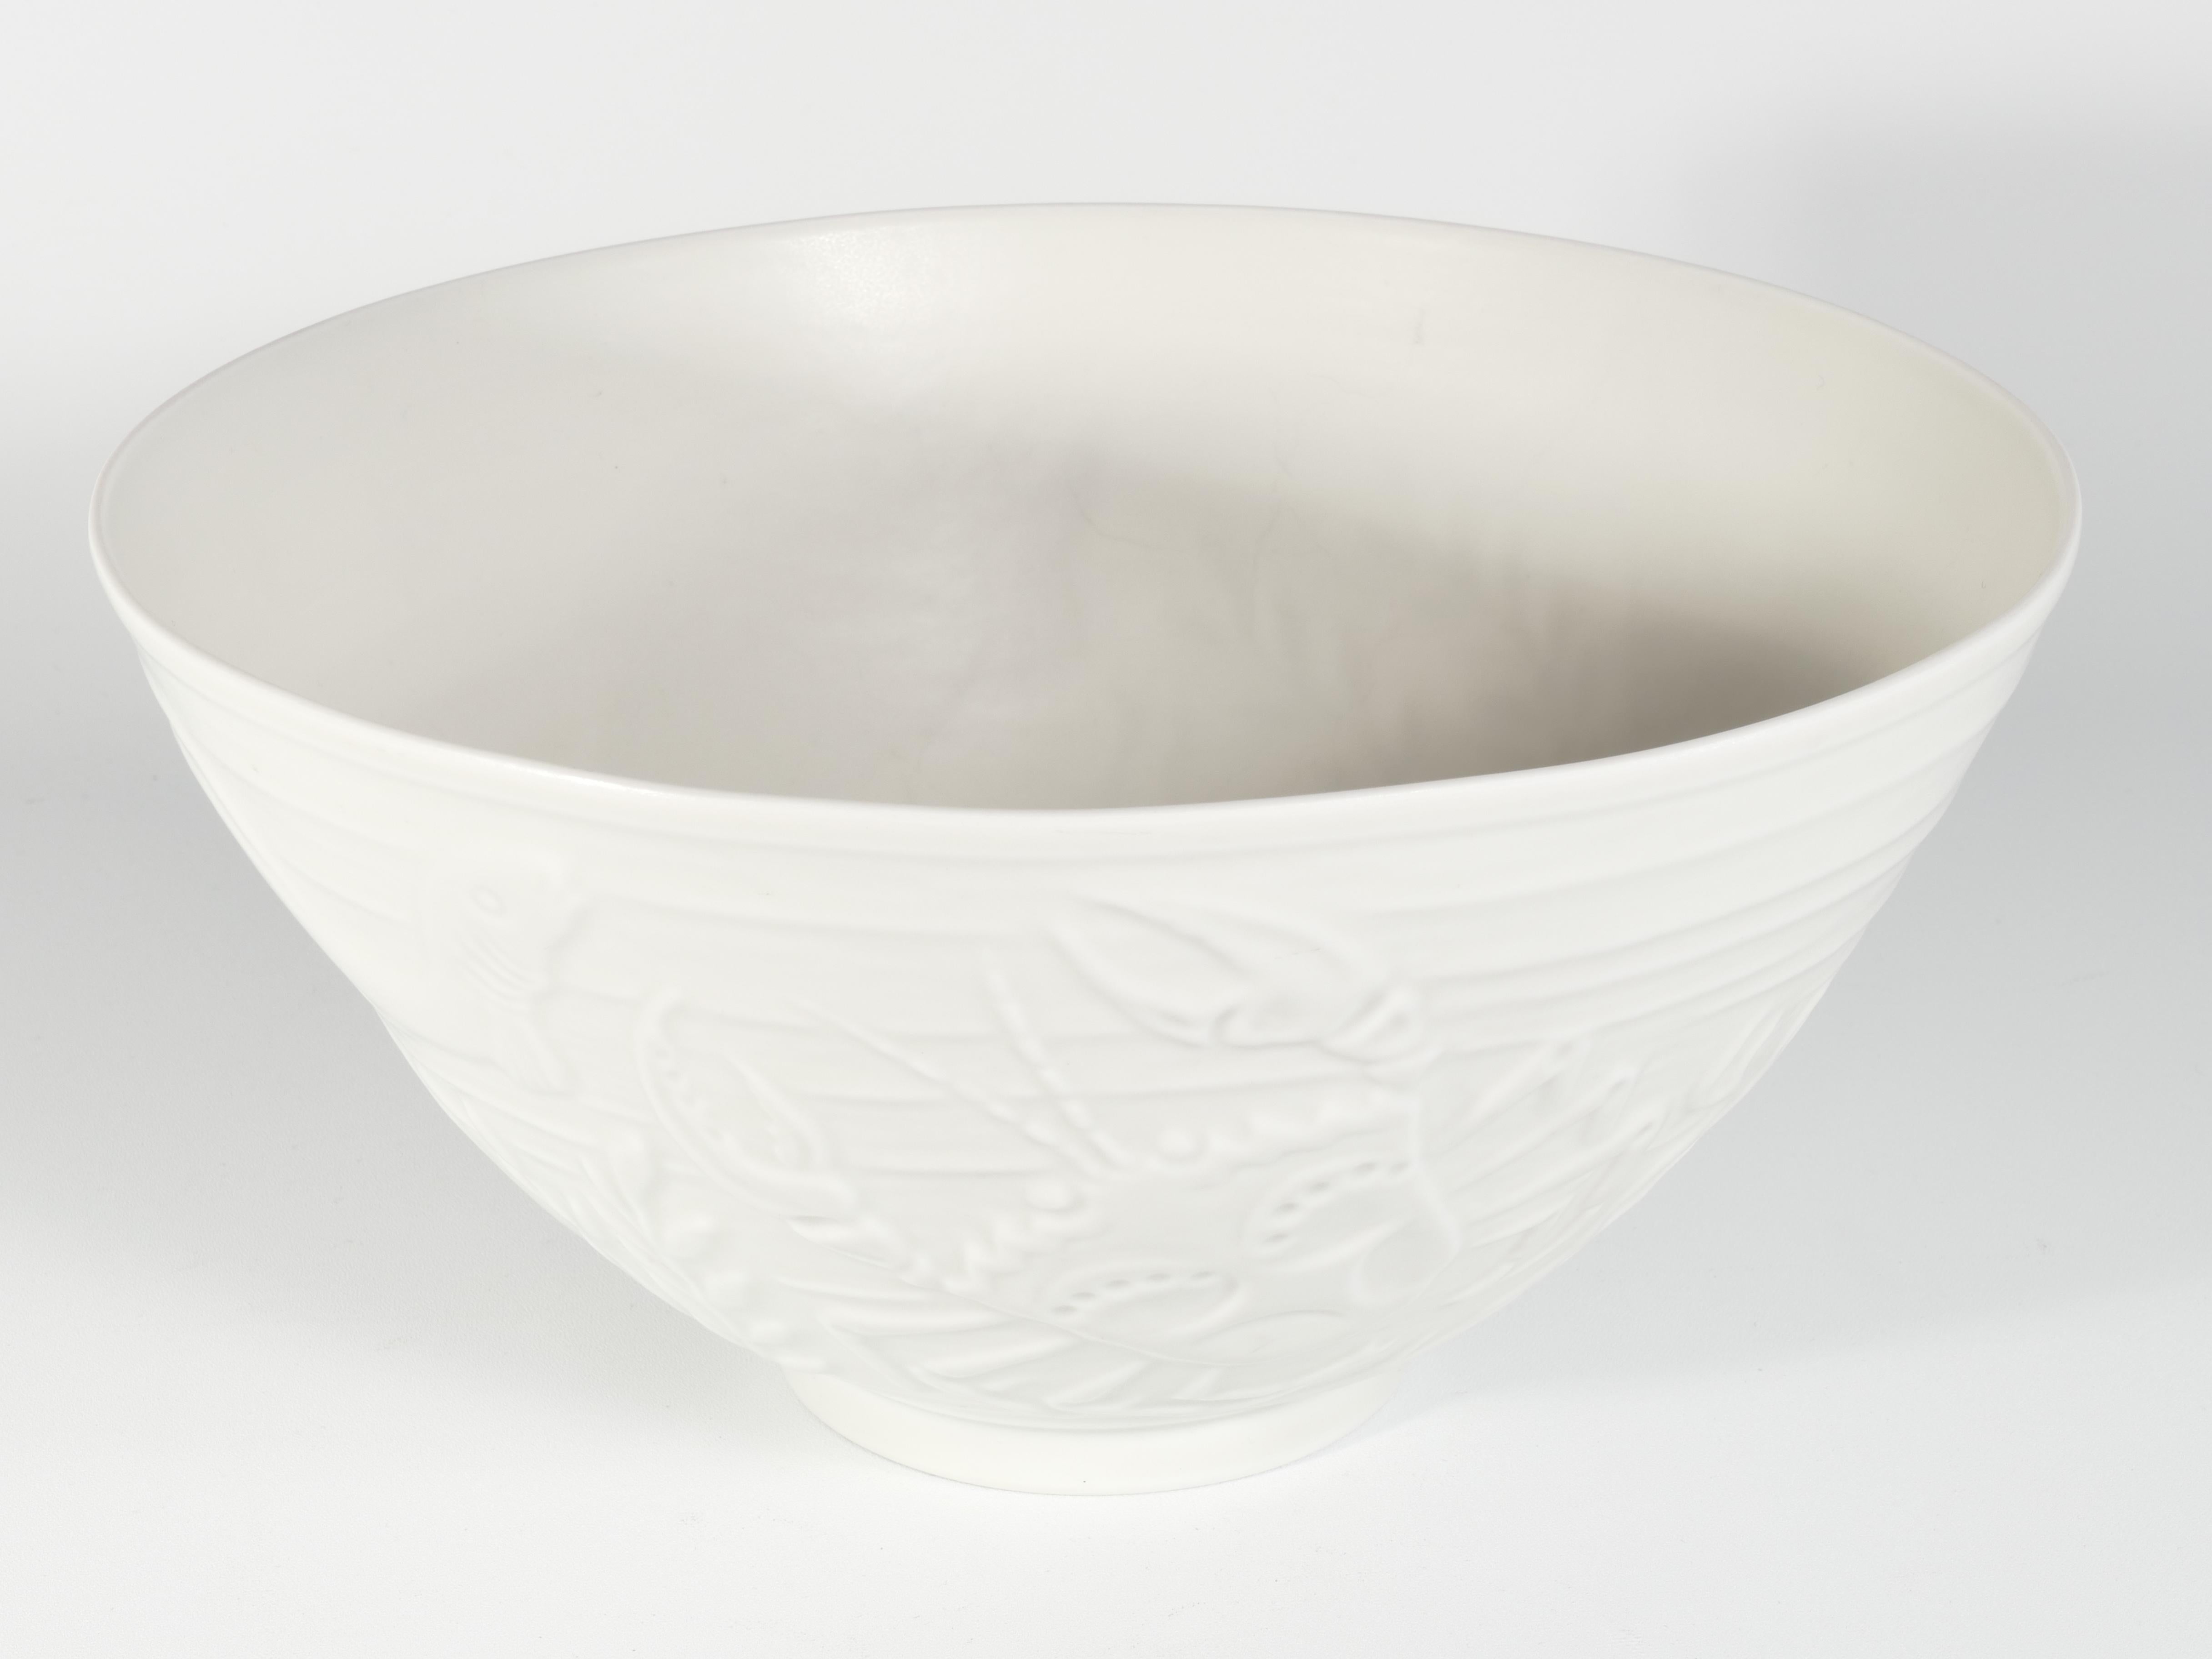 Swedish Grace White Porcelain Sea Themed  Bowl by Gunnar Nylund for ALP, 1940's For Sale 3